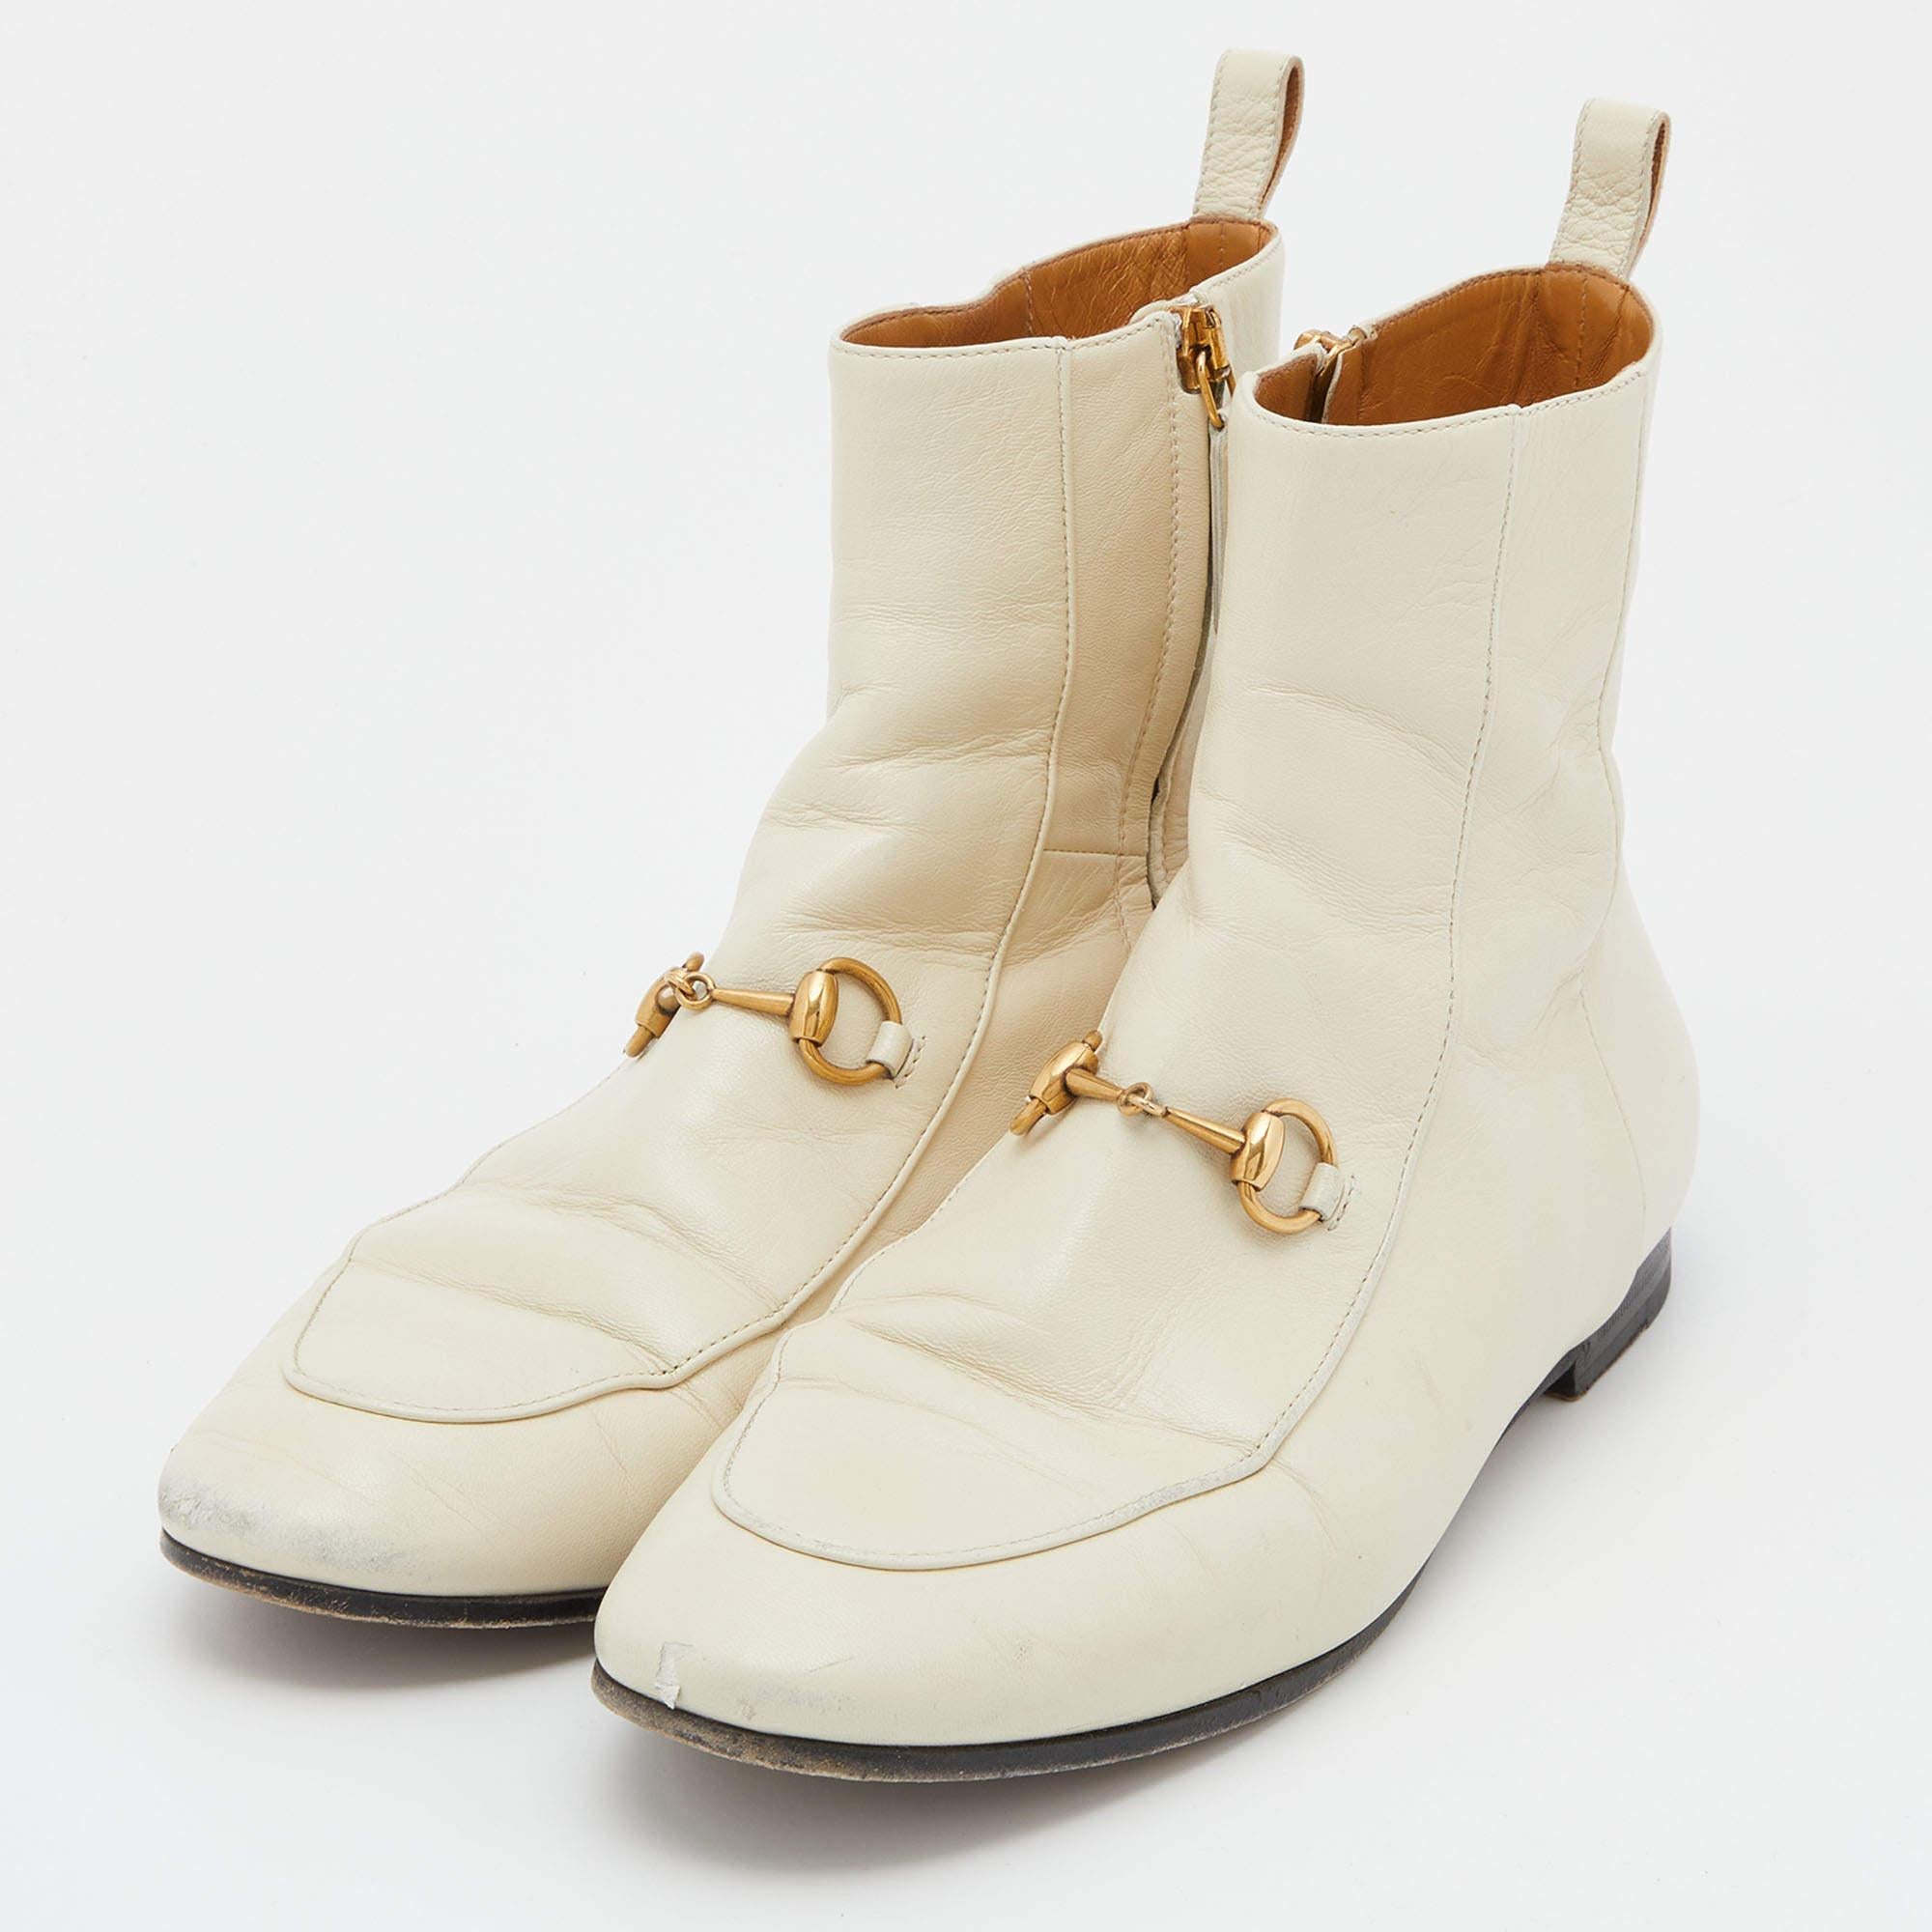 Enjoy the most fashionable days with these stylish Gucci Horsebit leather boots. Modern in design and craftsmanship, they are fashioned to keep you comfortable and chic!

